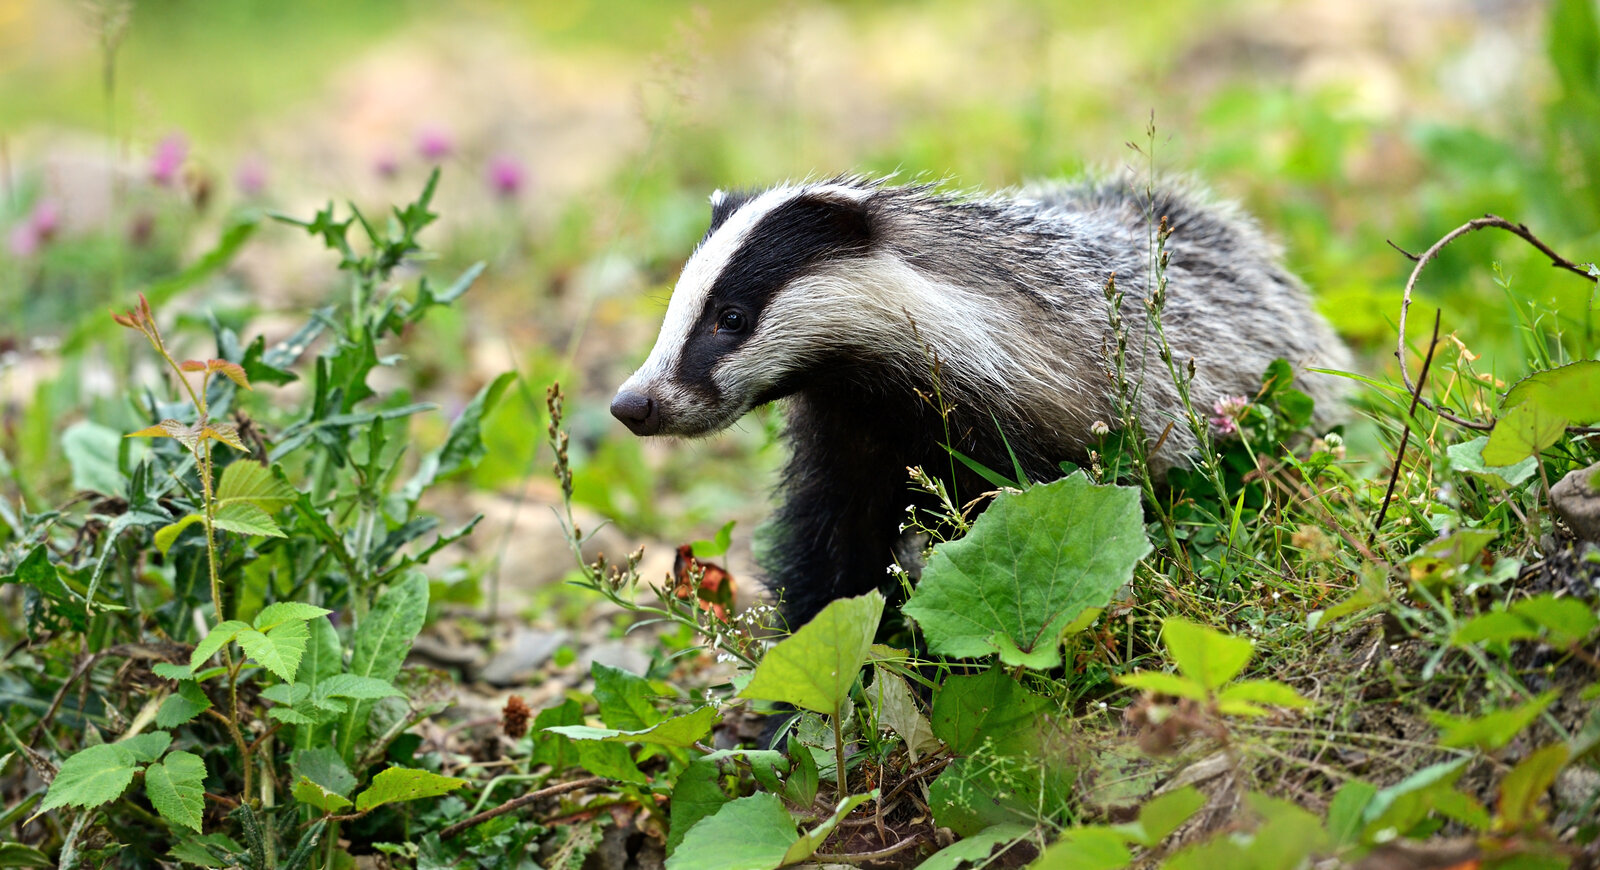 A photo of a badger in the undergrowth